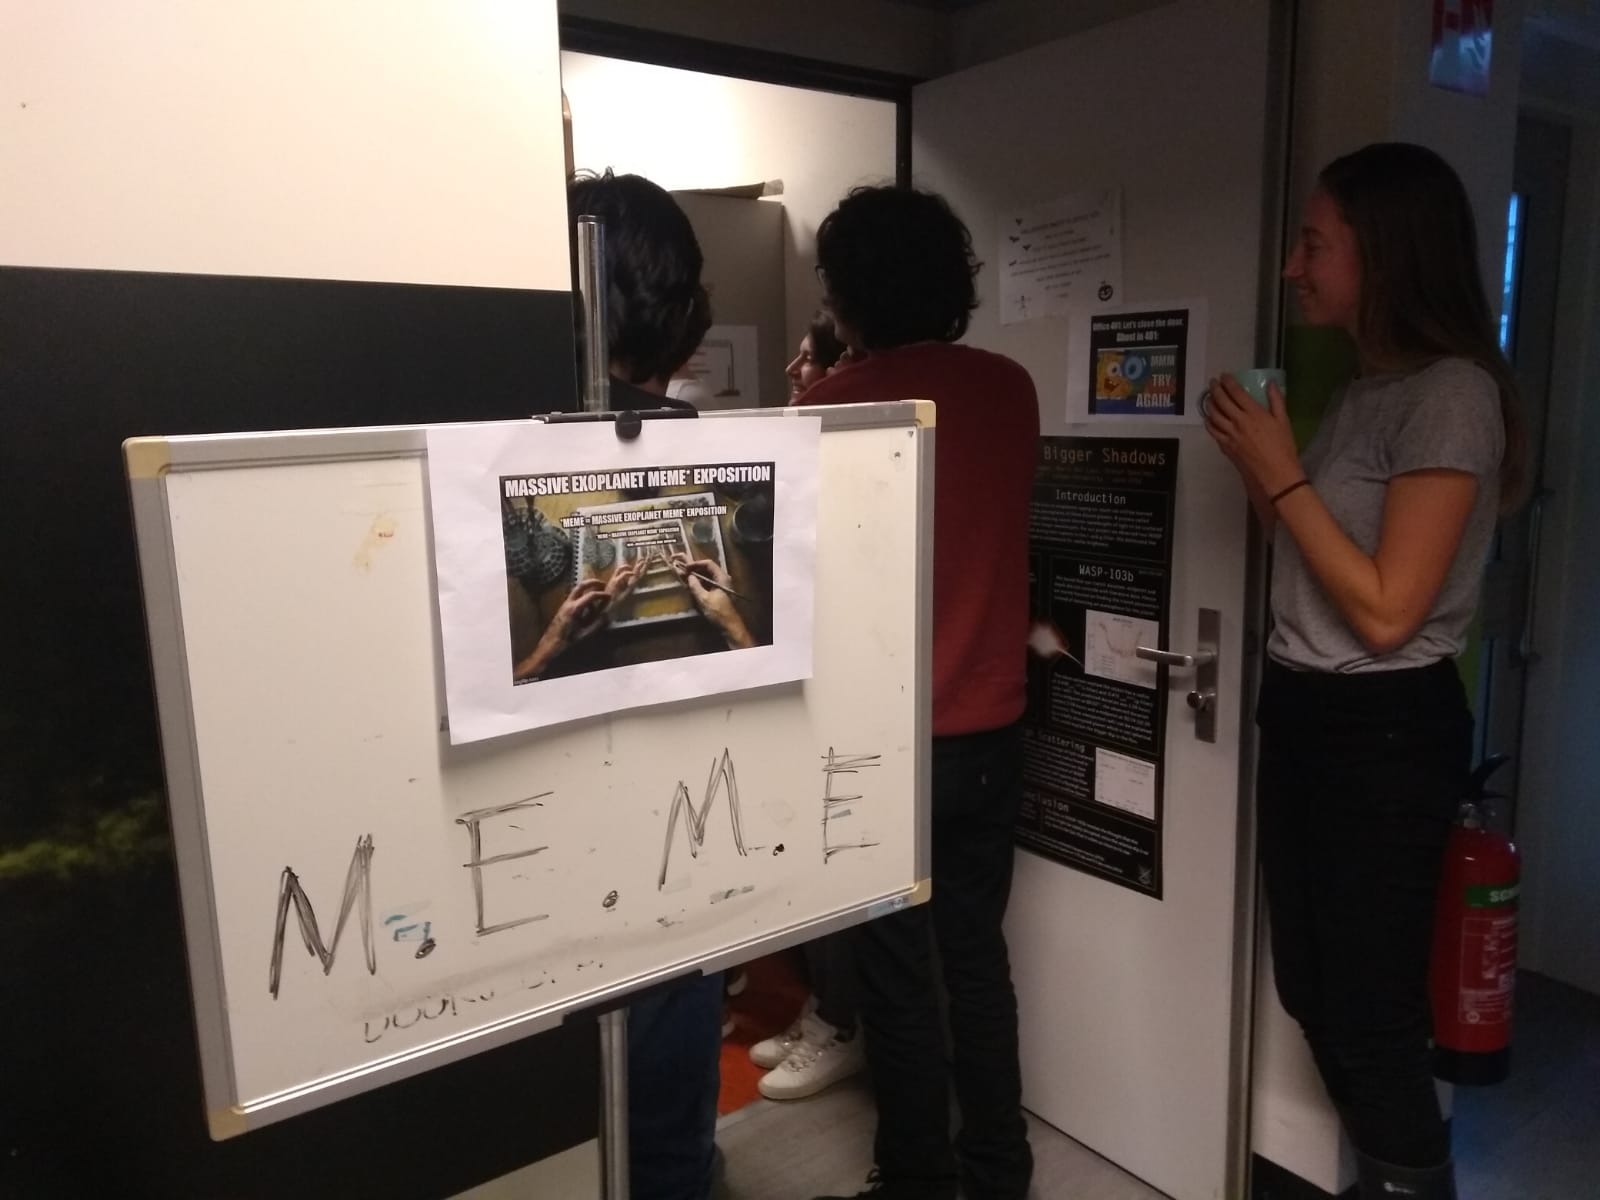 Entrance to the first MEME exhibition within Office 401.